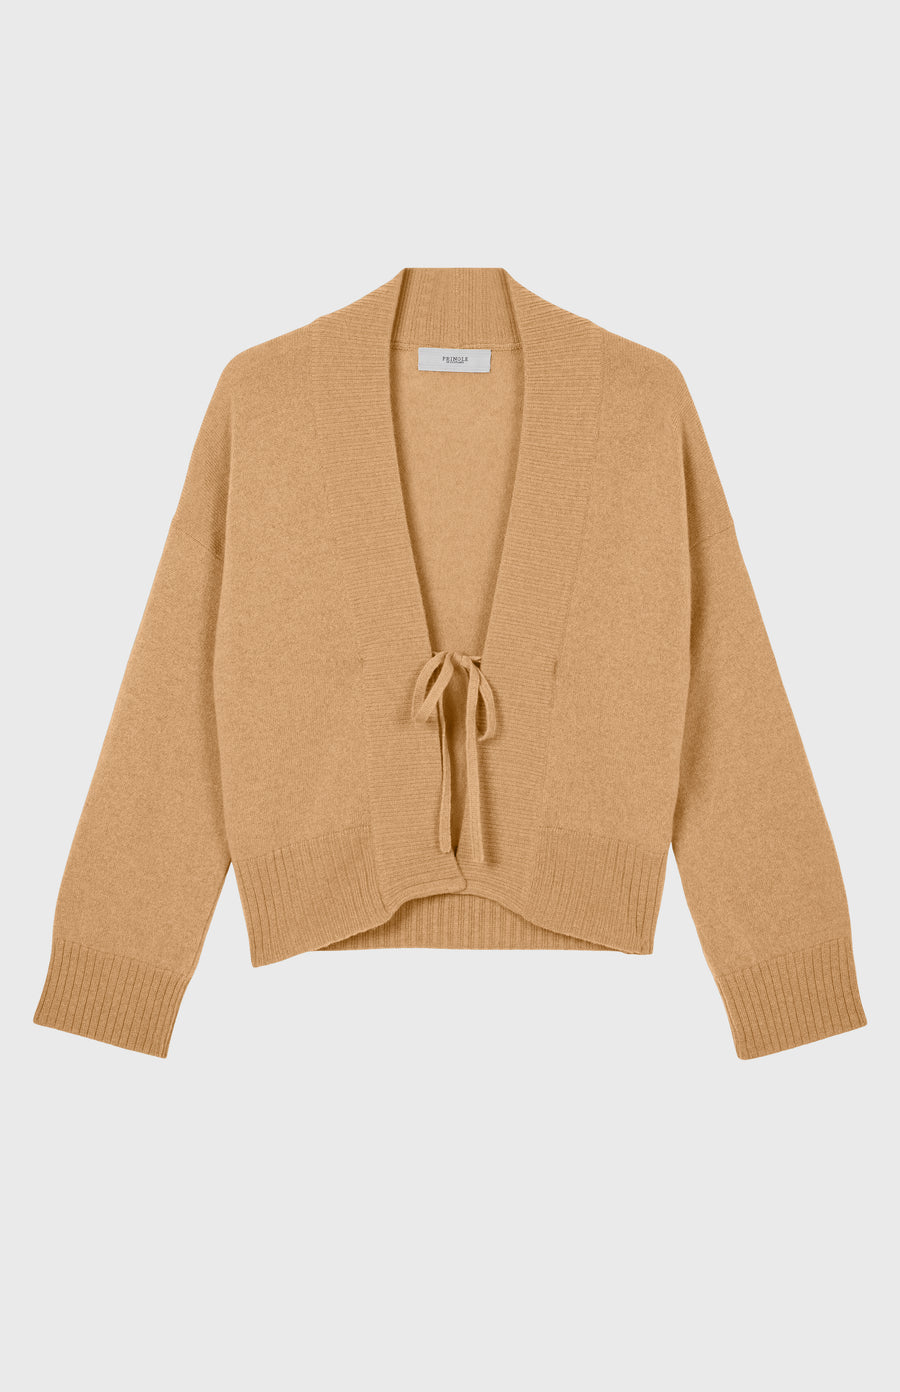 Women's Lightweight Cashmere Open Cardigan with Tie in Sand flat shot